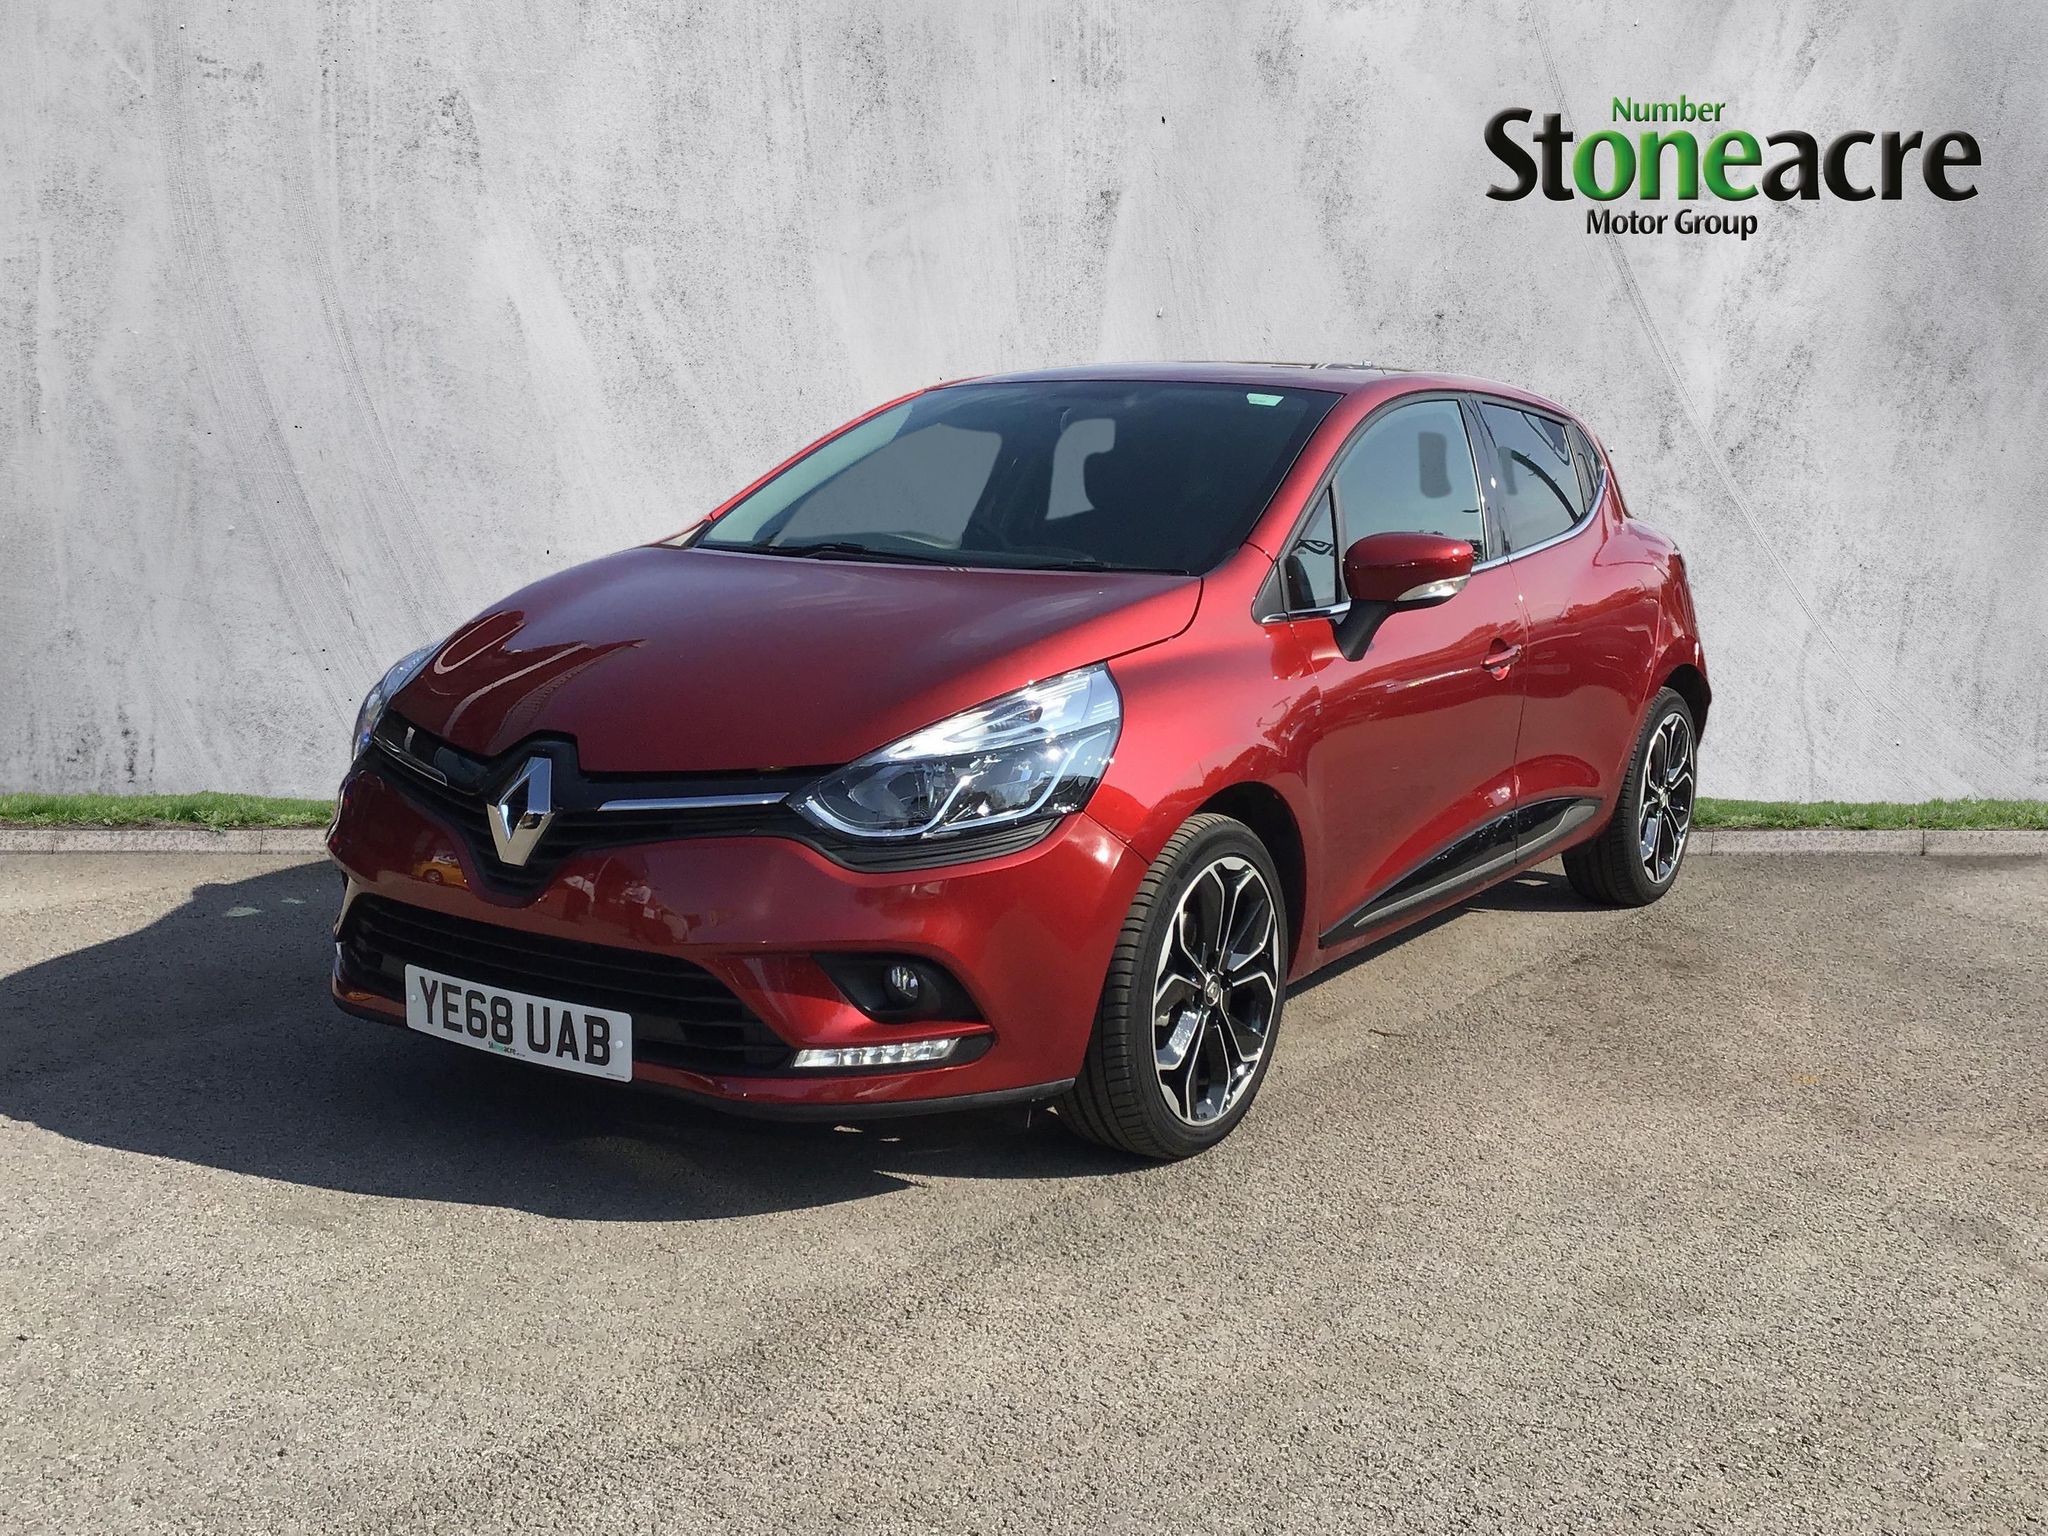 Used Renault Clio 1.5 dCi 90 Iconic 5dr (YE68UAB) Stoneacre